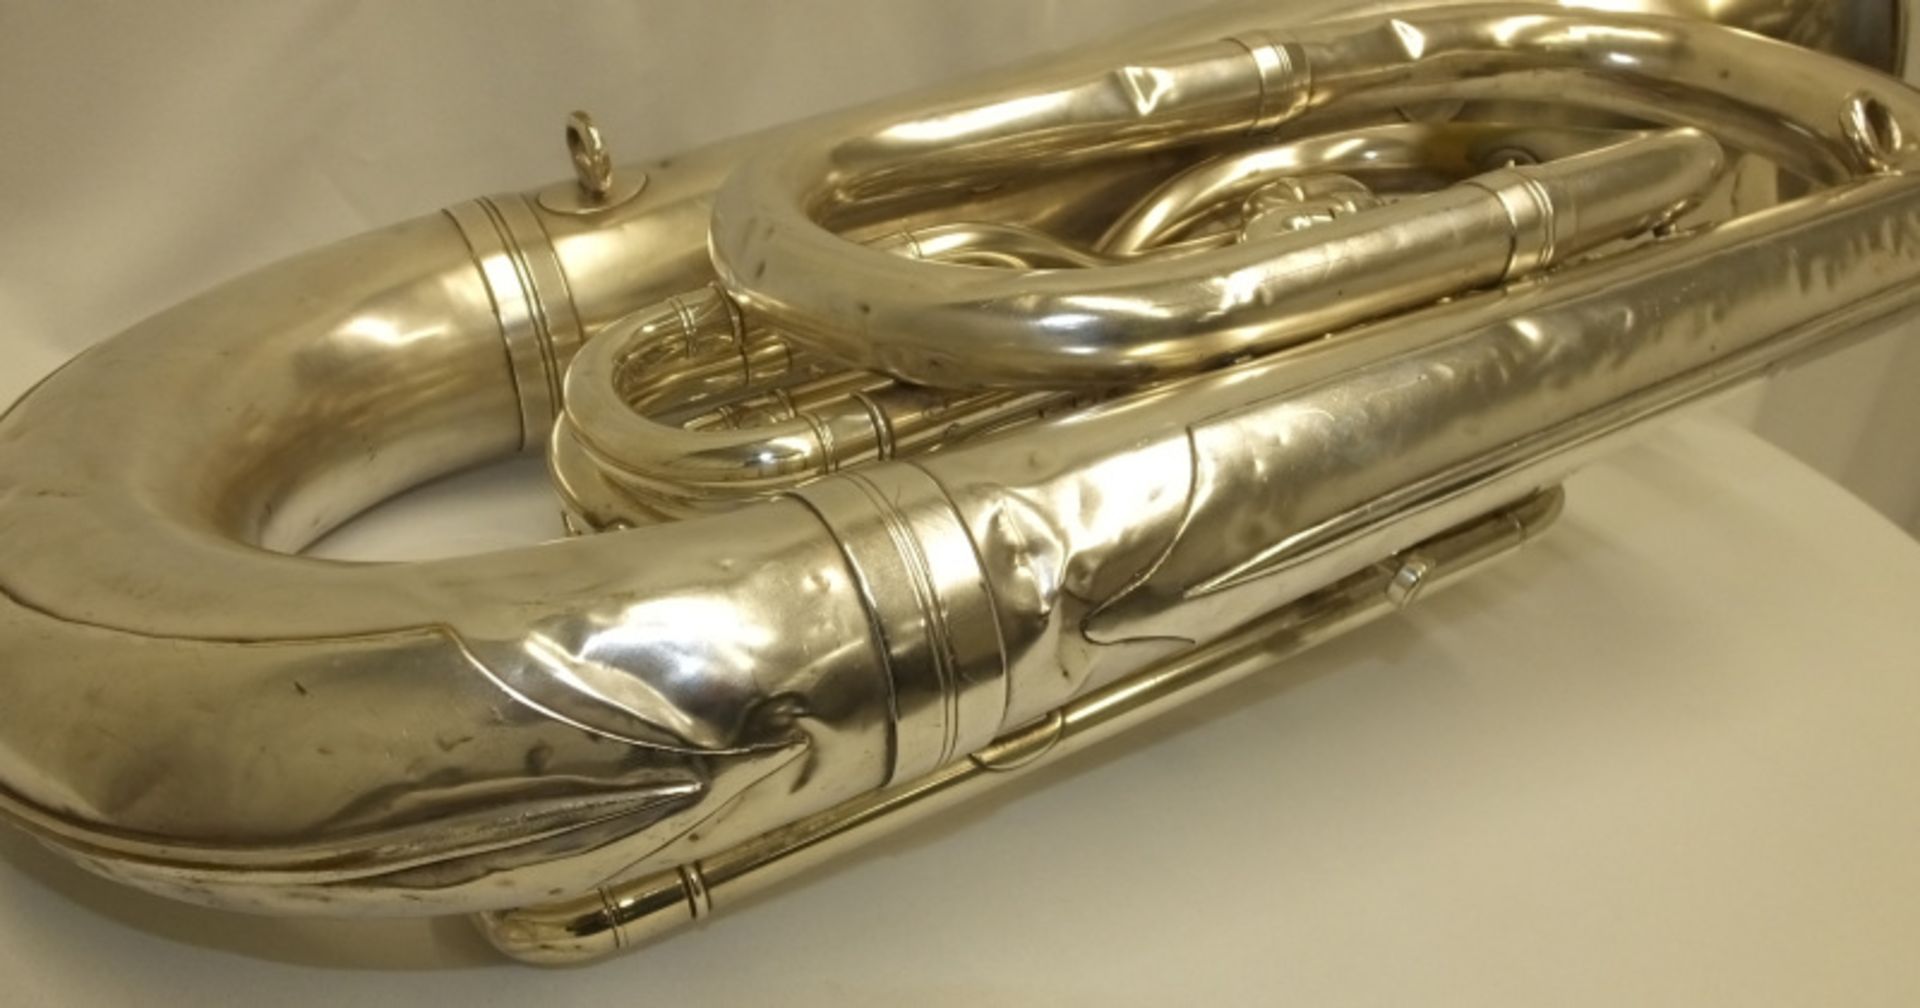 Boosey & Hawkes Imperial Tuba in case - Serial number 352762 - Please check photos carefully - Image 11 of 19